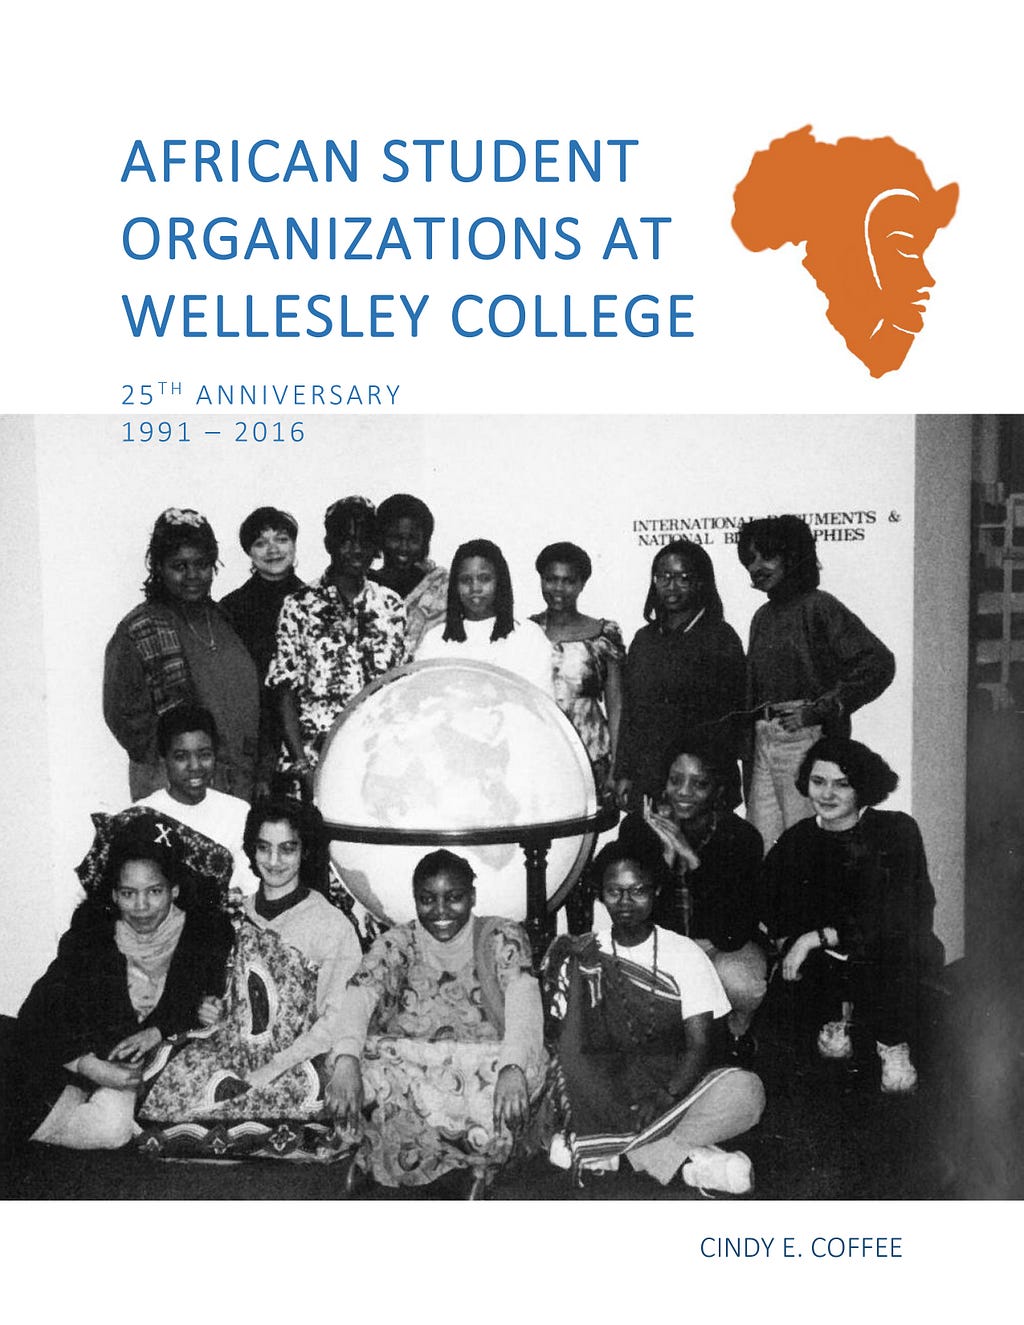 African Student Organizations at Wellesley College. 25th Anniversary 1991–2016. Featuring the founding members of Africa Awareness Now (AAN).